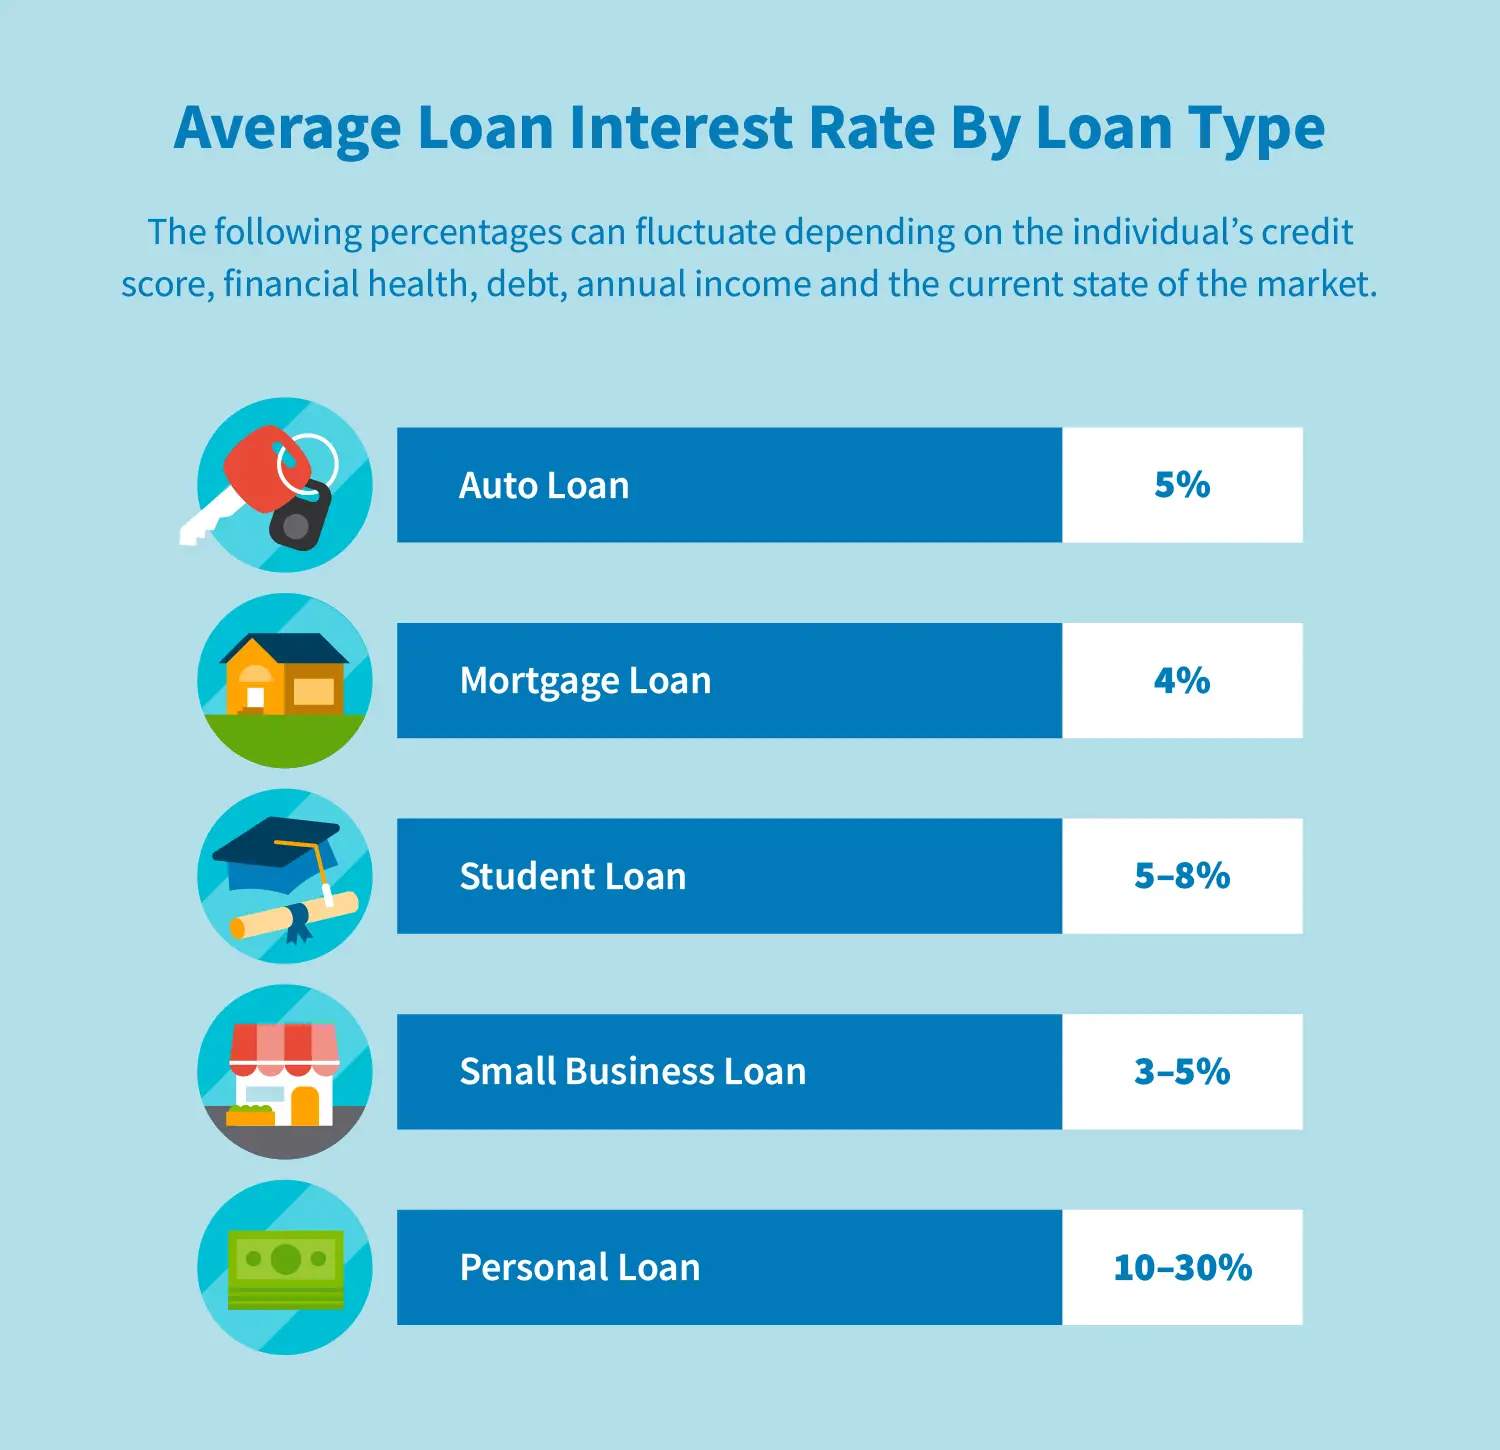 What Is the Average Loan Interest Rate?